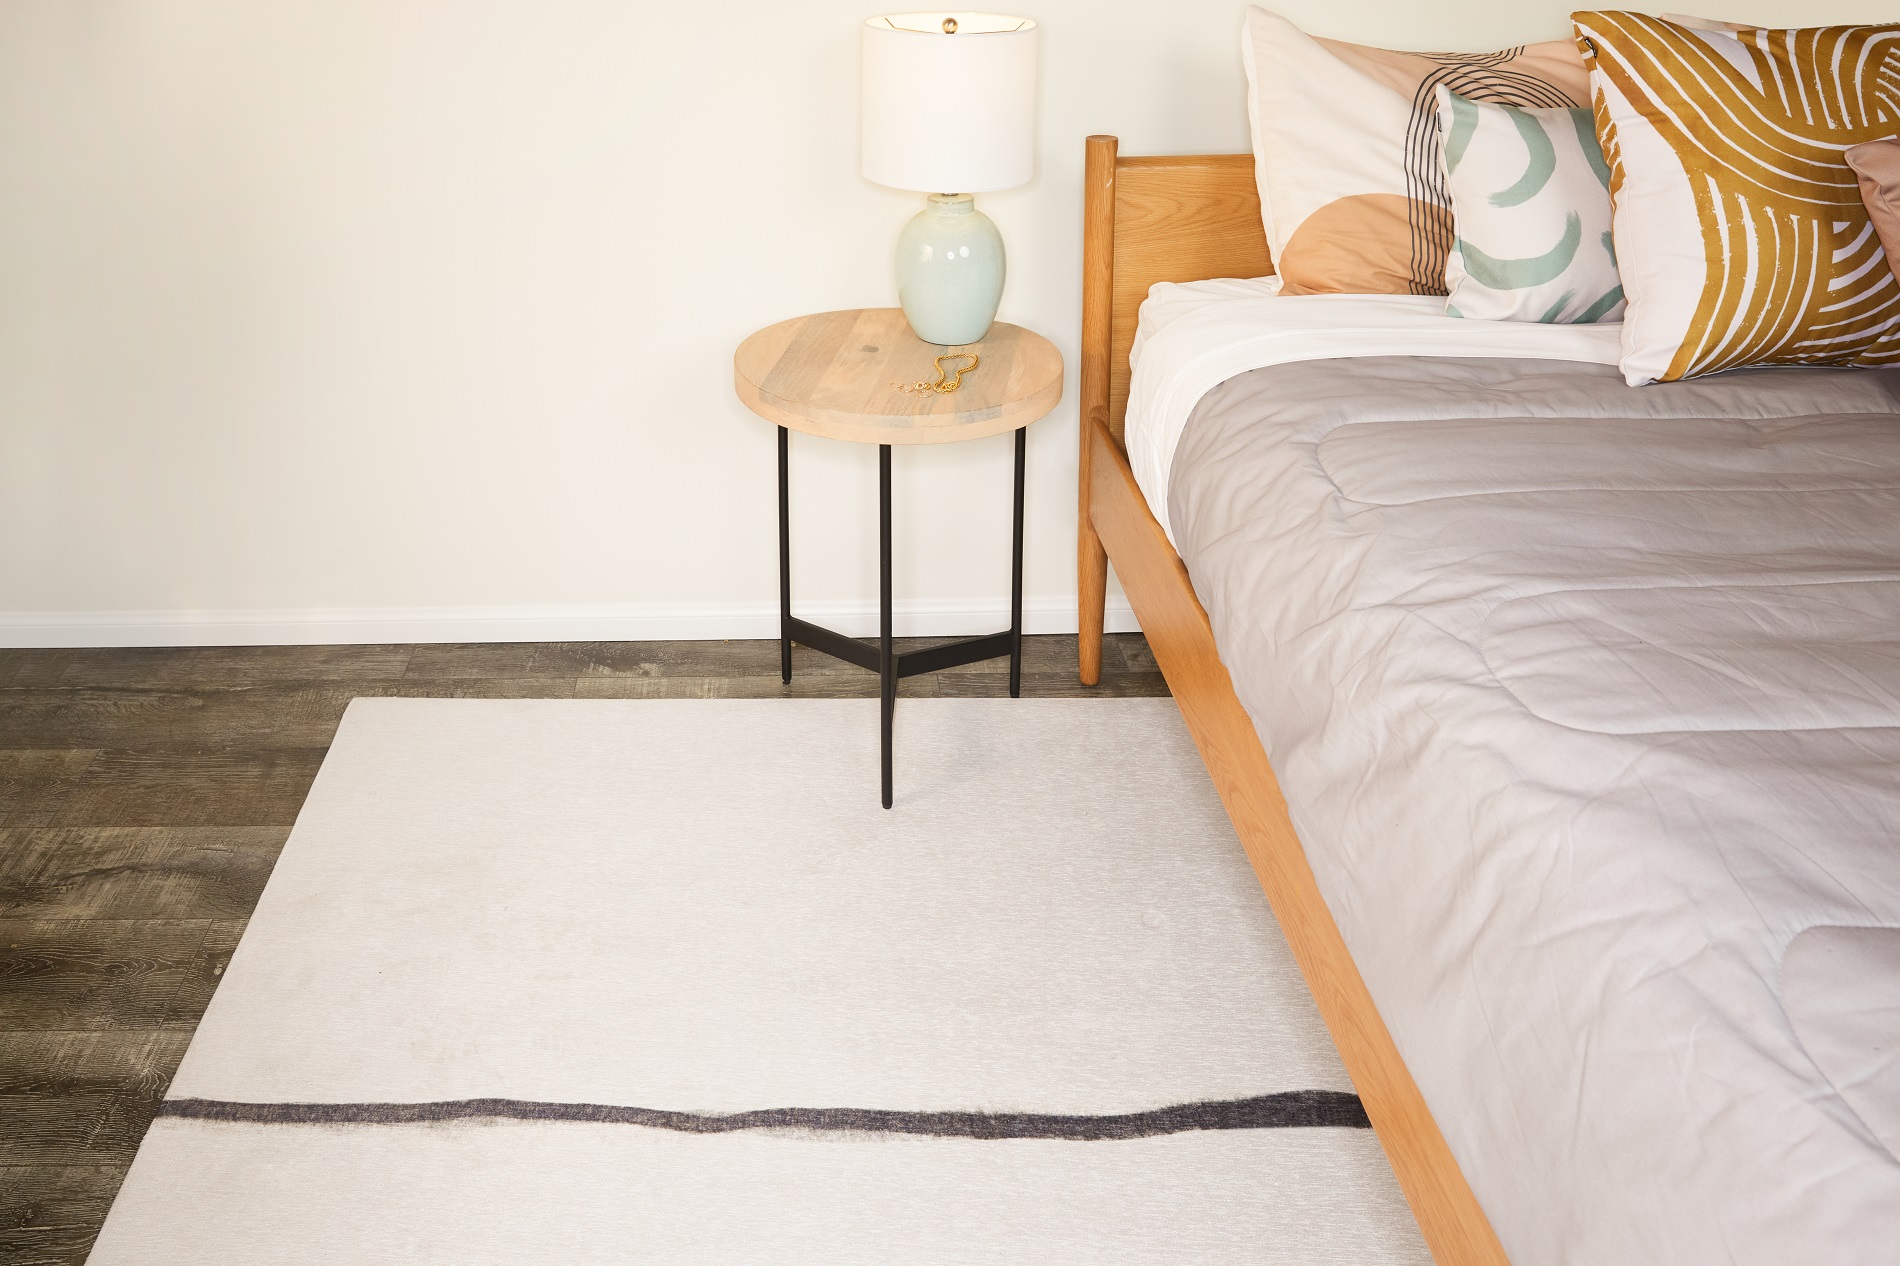 Bedroom Rug Placement: Layout & Size Ideas